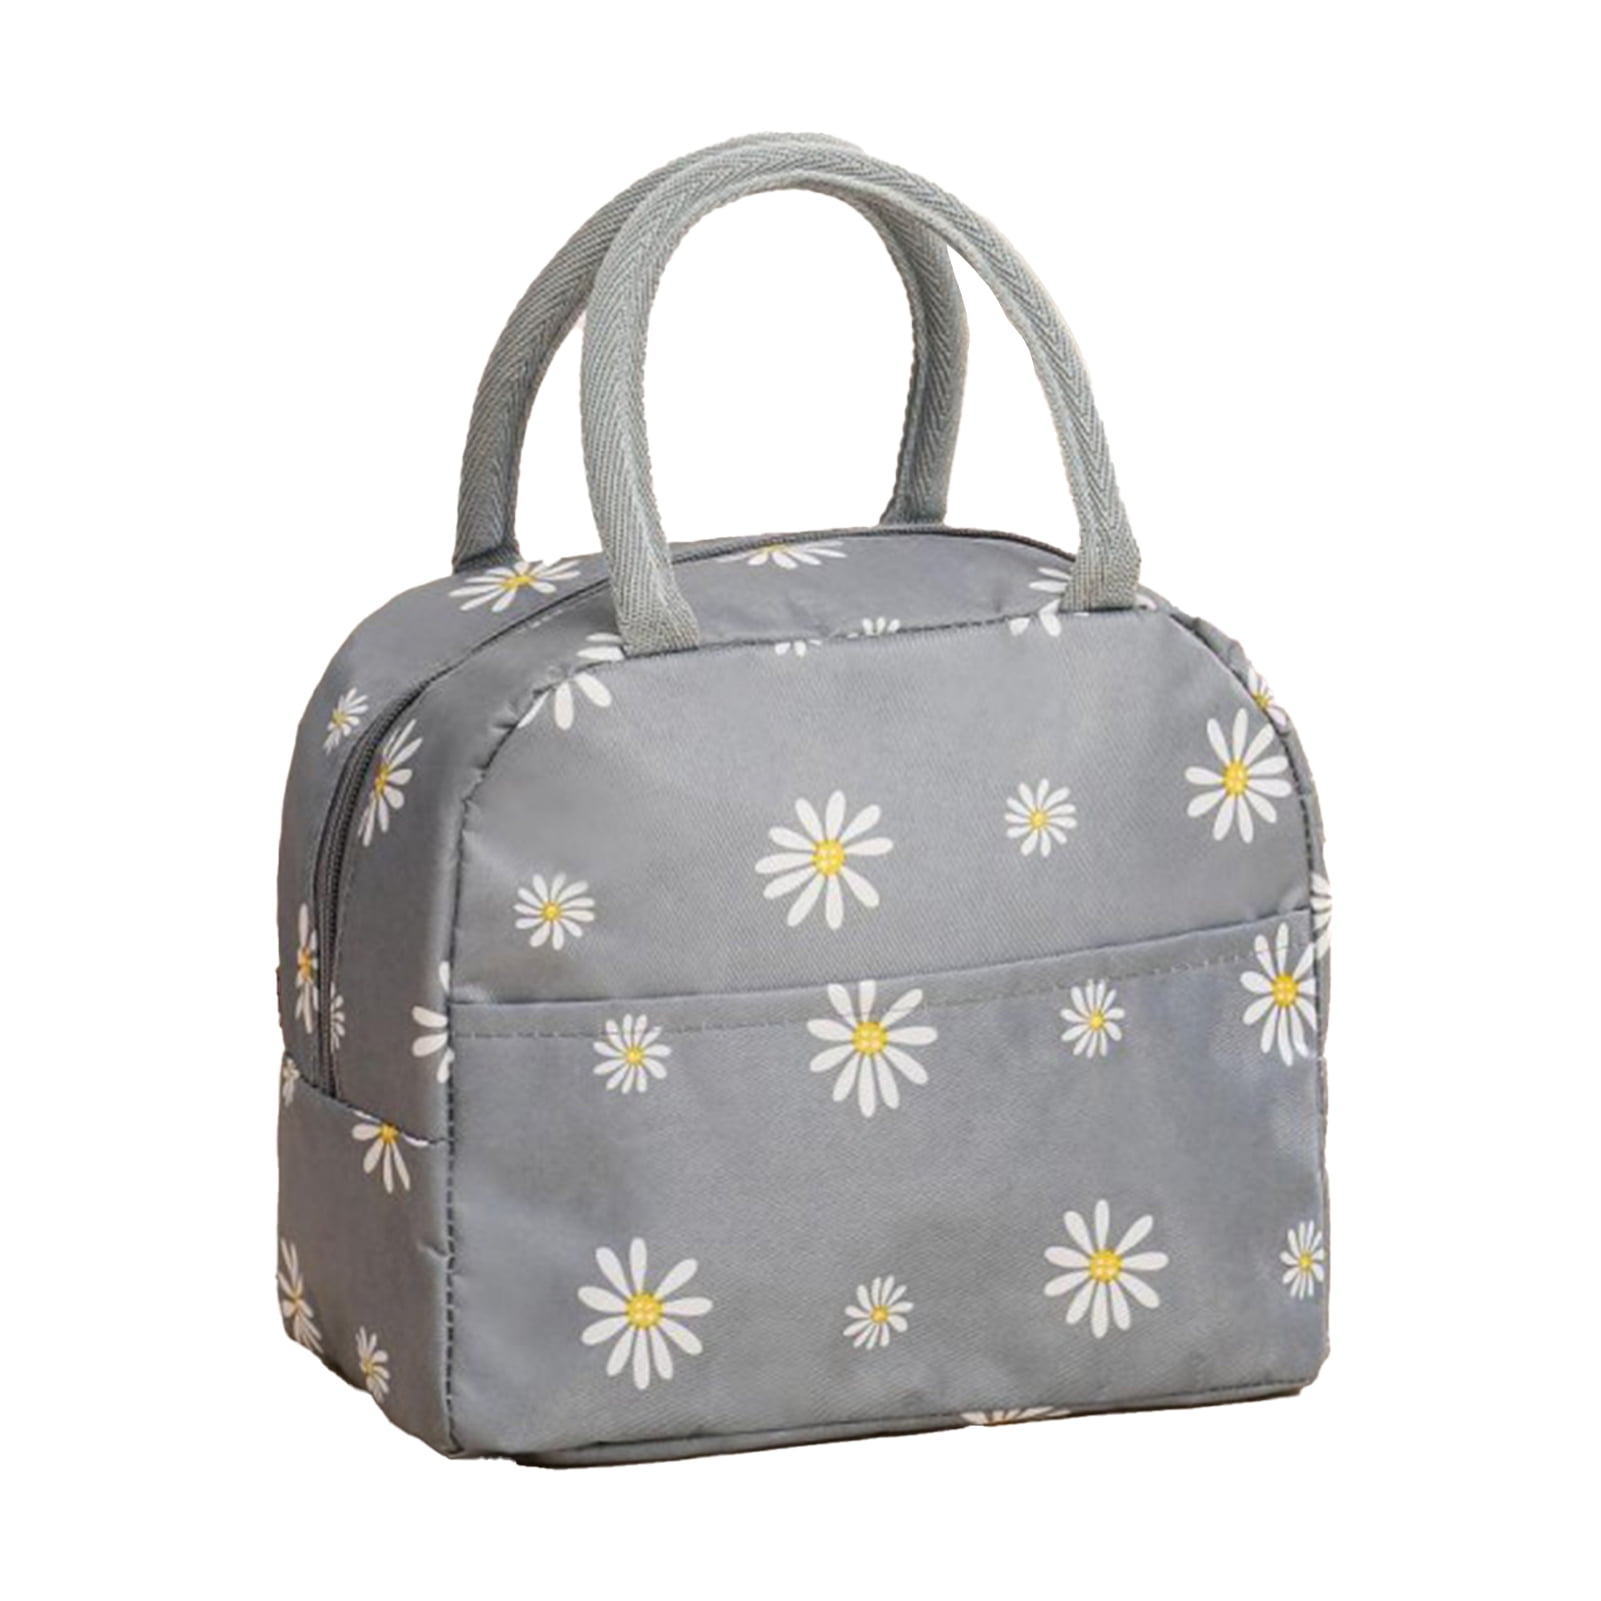 TOPOINT Lunch Bag Cooler Bag Women Tote Bag Insulated Lunch Box